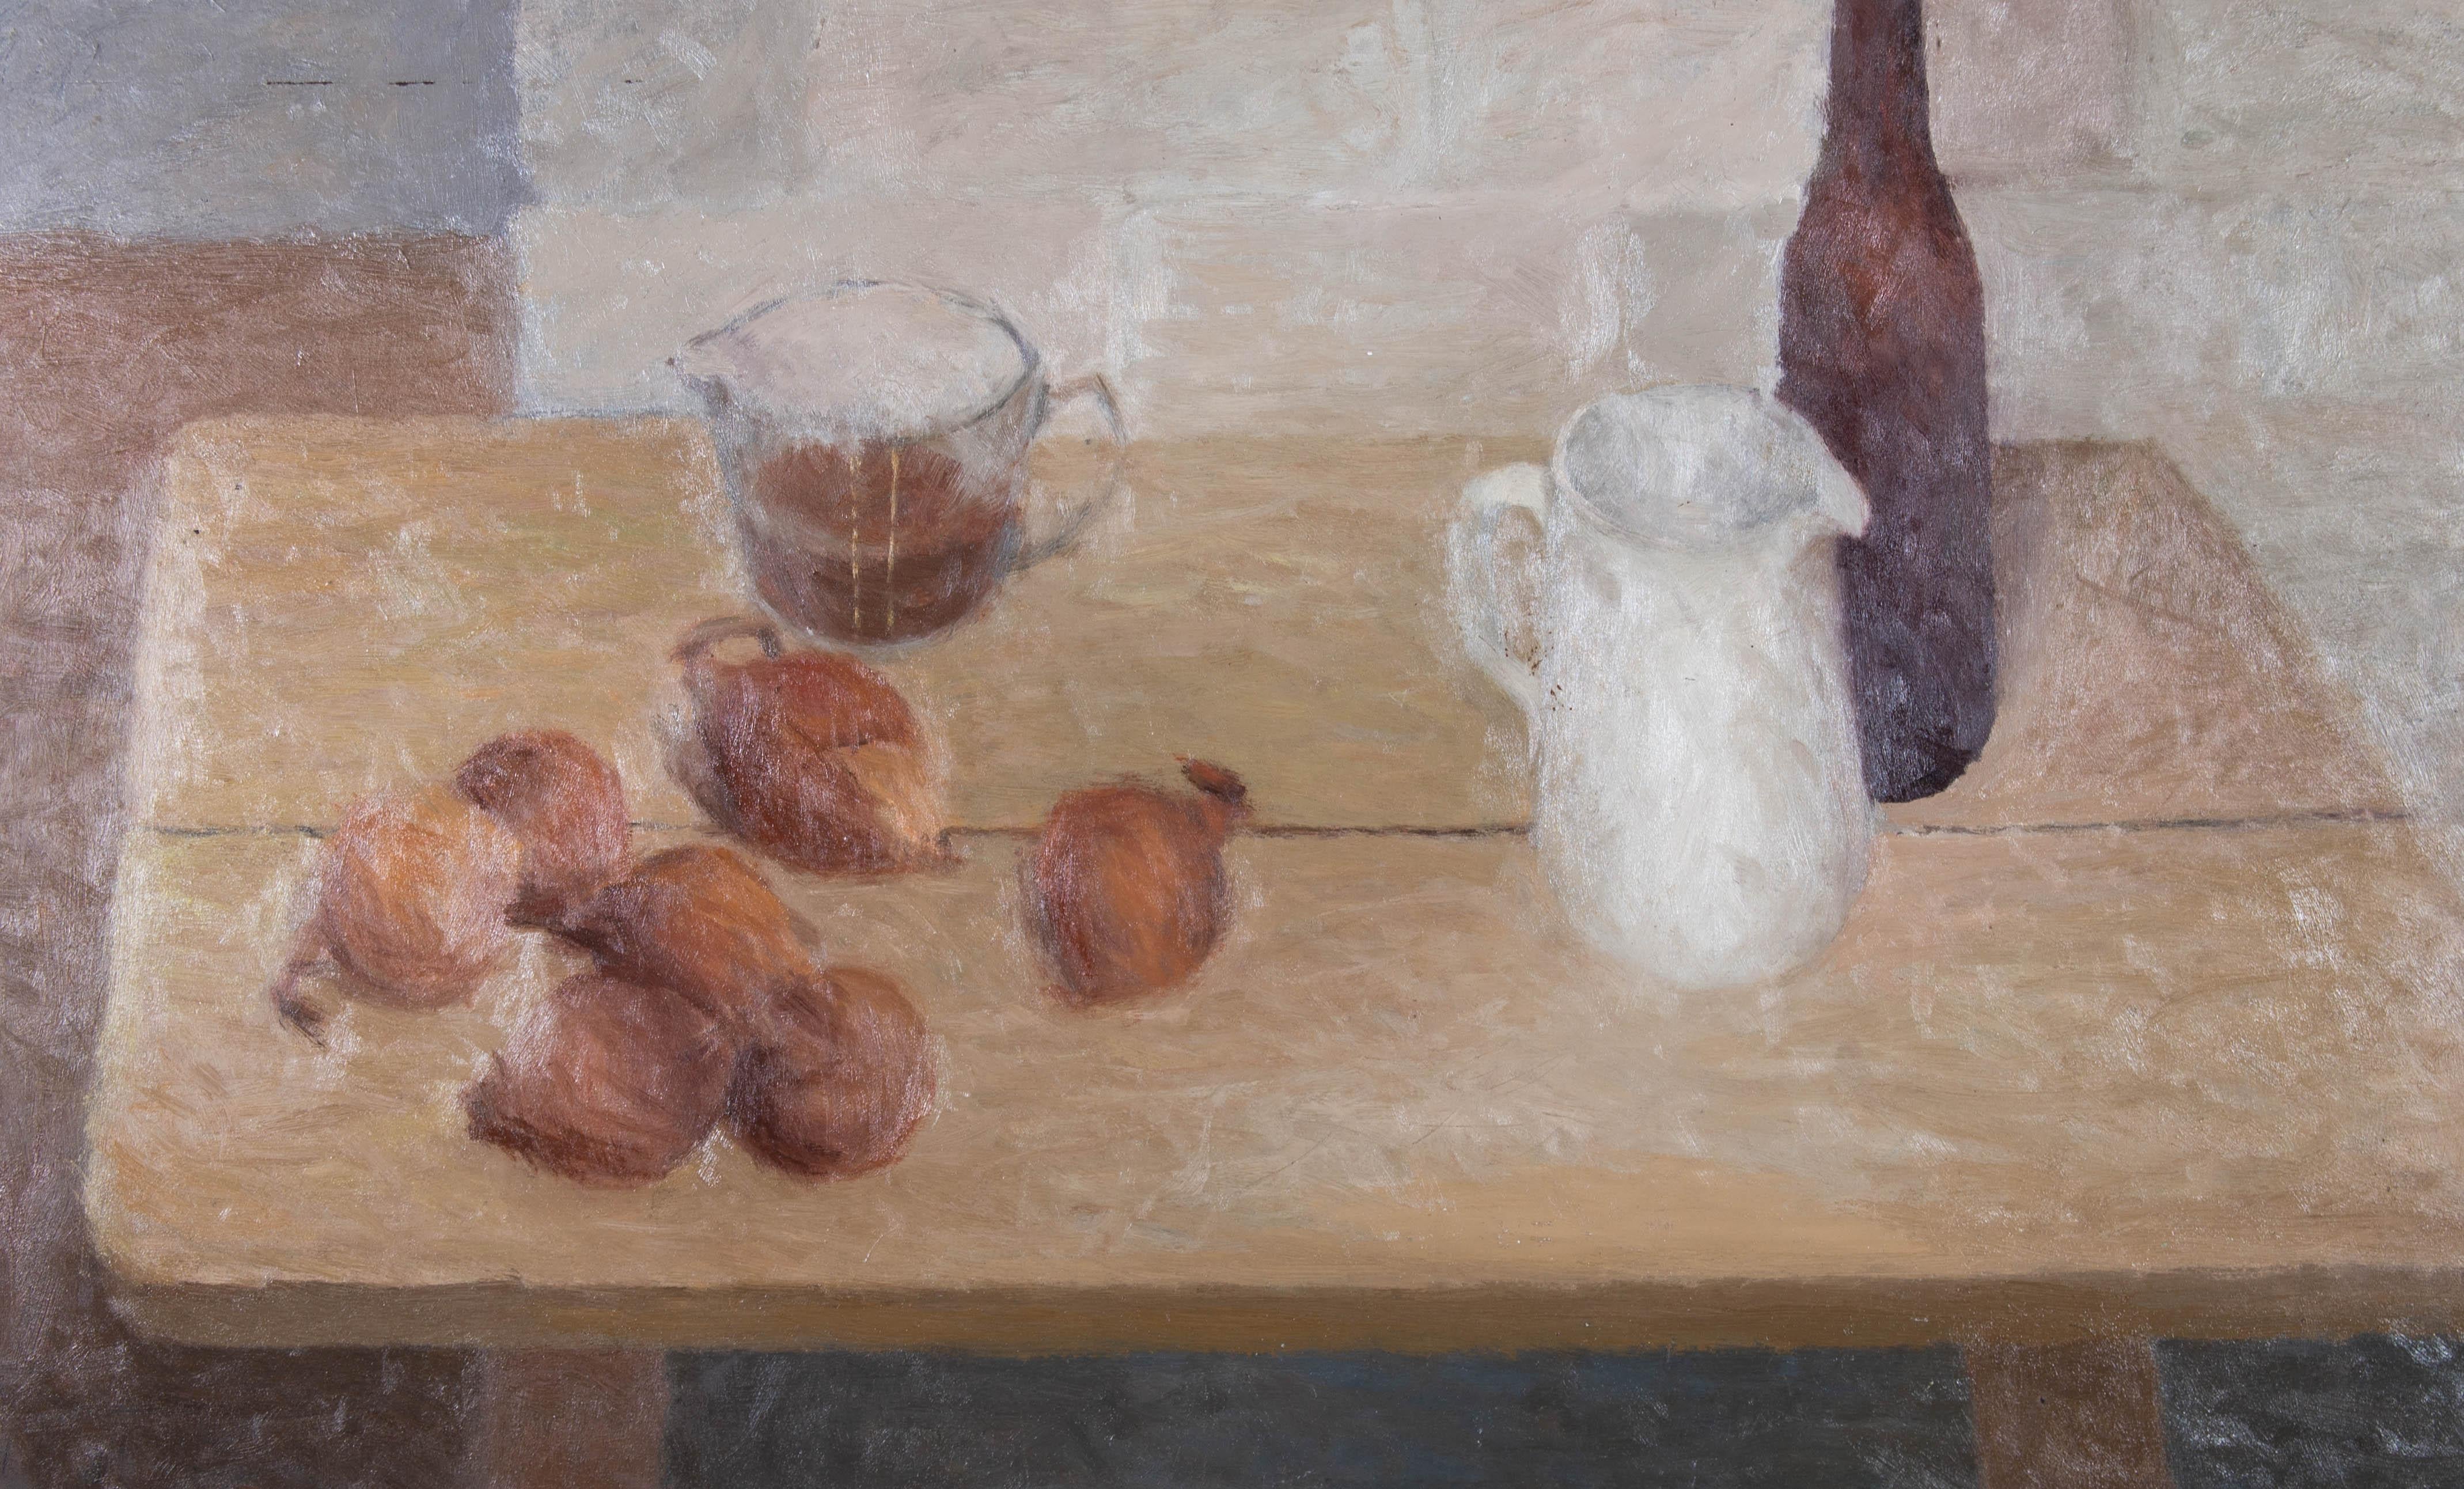 A charmingly rustic oil still life showing a pile of onions on a wooden kitchen bench with a measuring jug full of brown liquid and several other vessels. The painting has a tangible domesticity with muted colours and honest subject matter. The